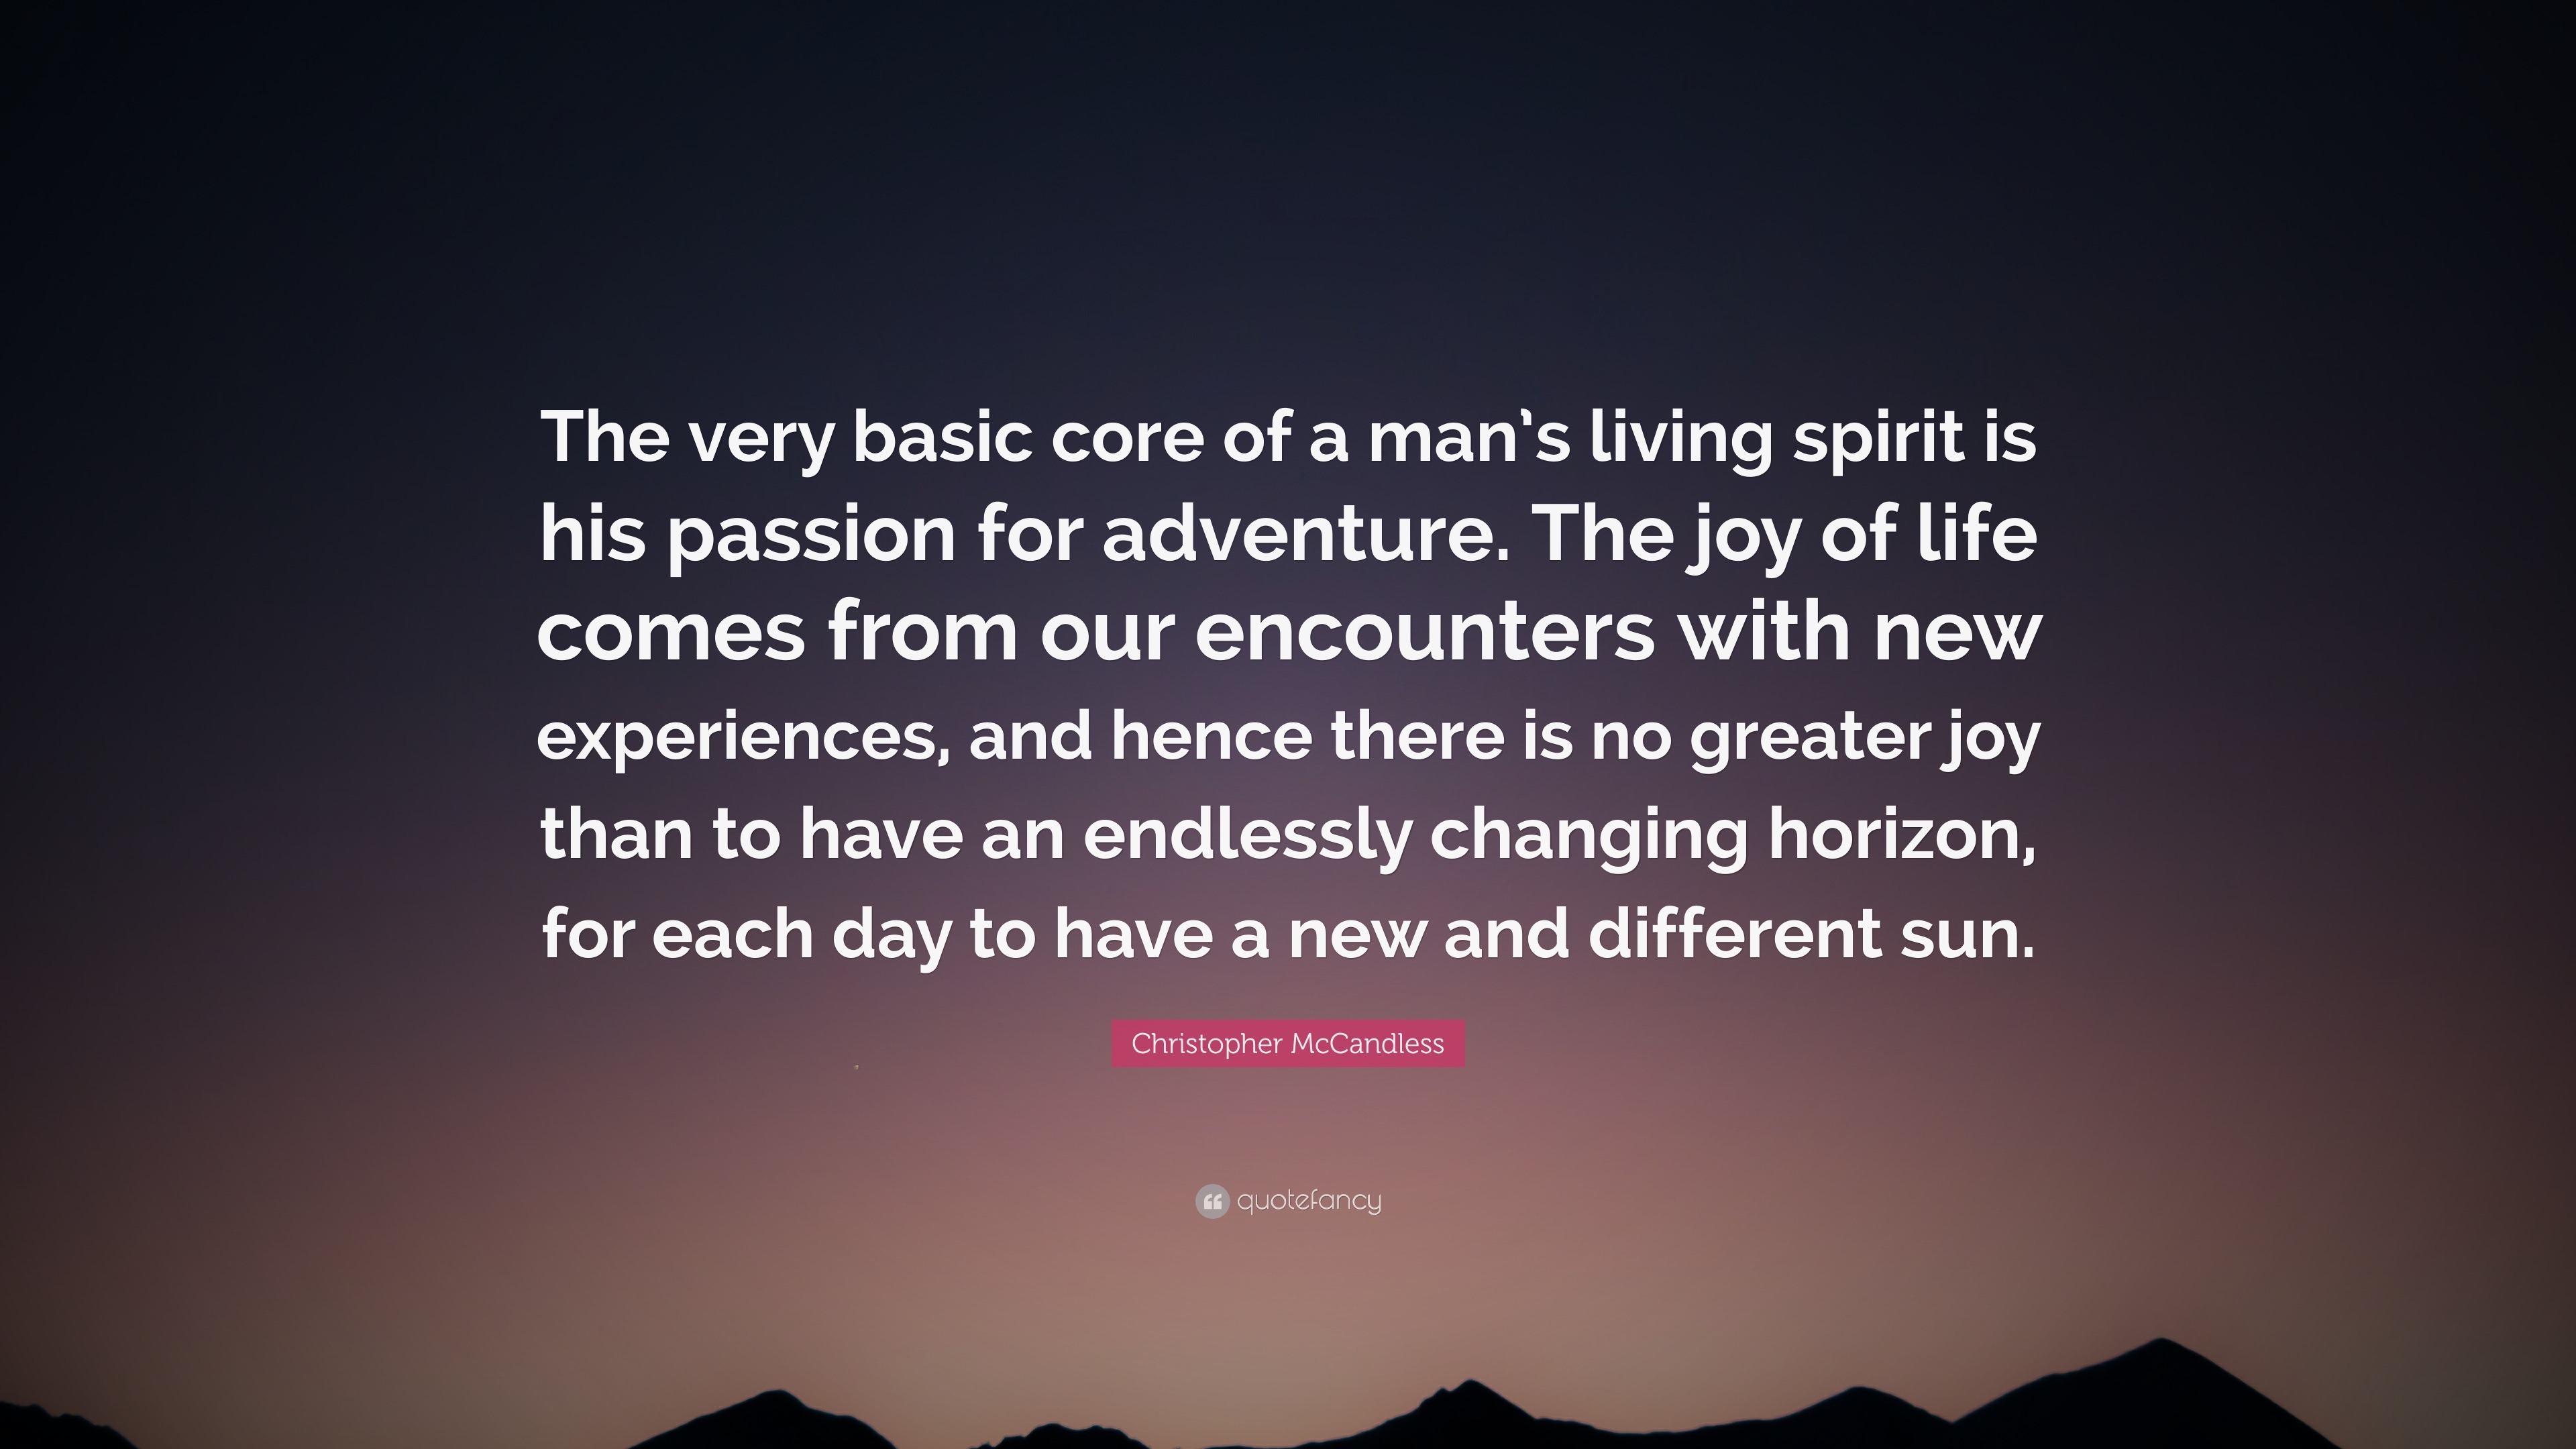 Christopher McCandless Quote “The very basic core of a man s living spirit is his